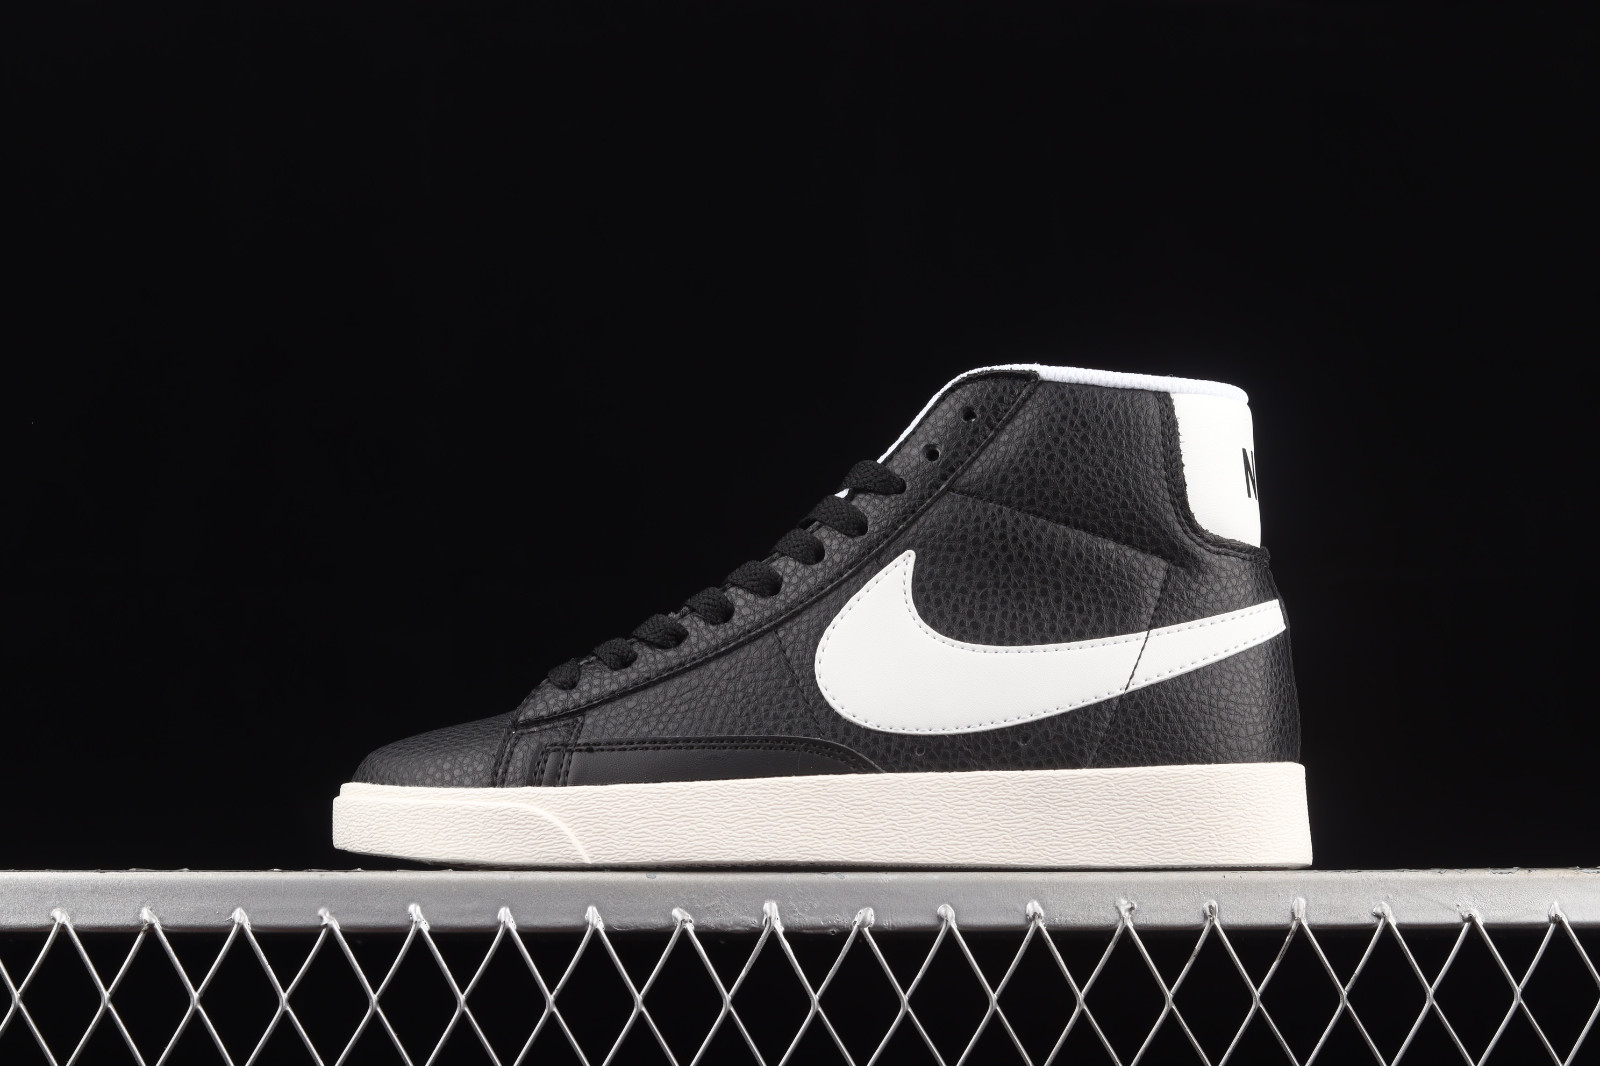 Nike SB Mid Vintage Suede Black White Shoes AV9376 - the of a running shoe here - 004 - GmarShops